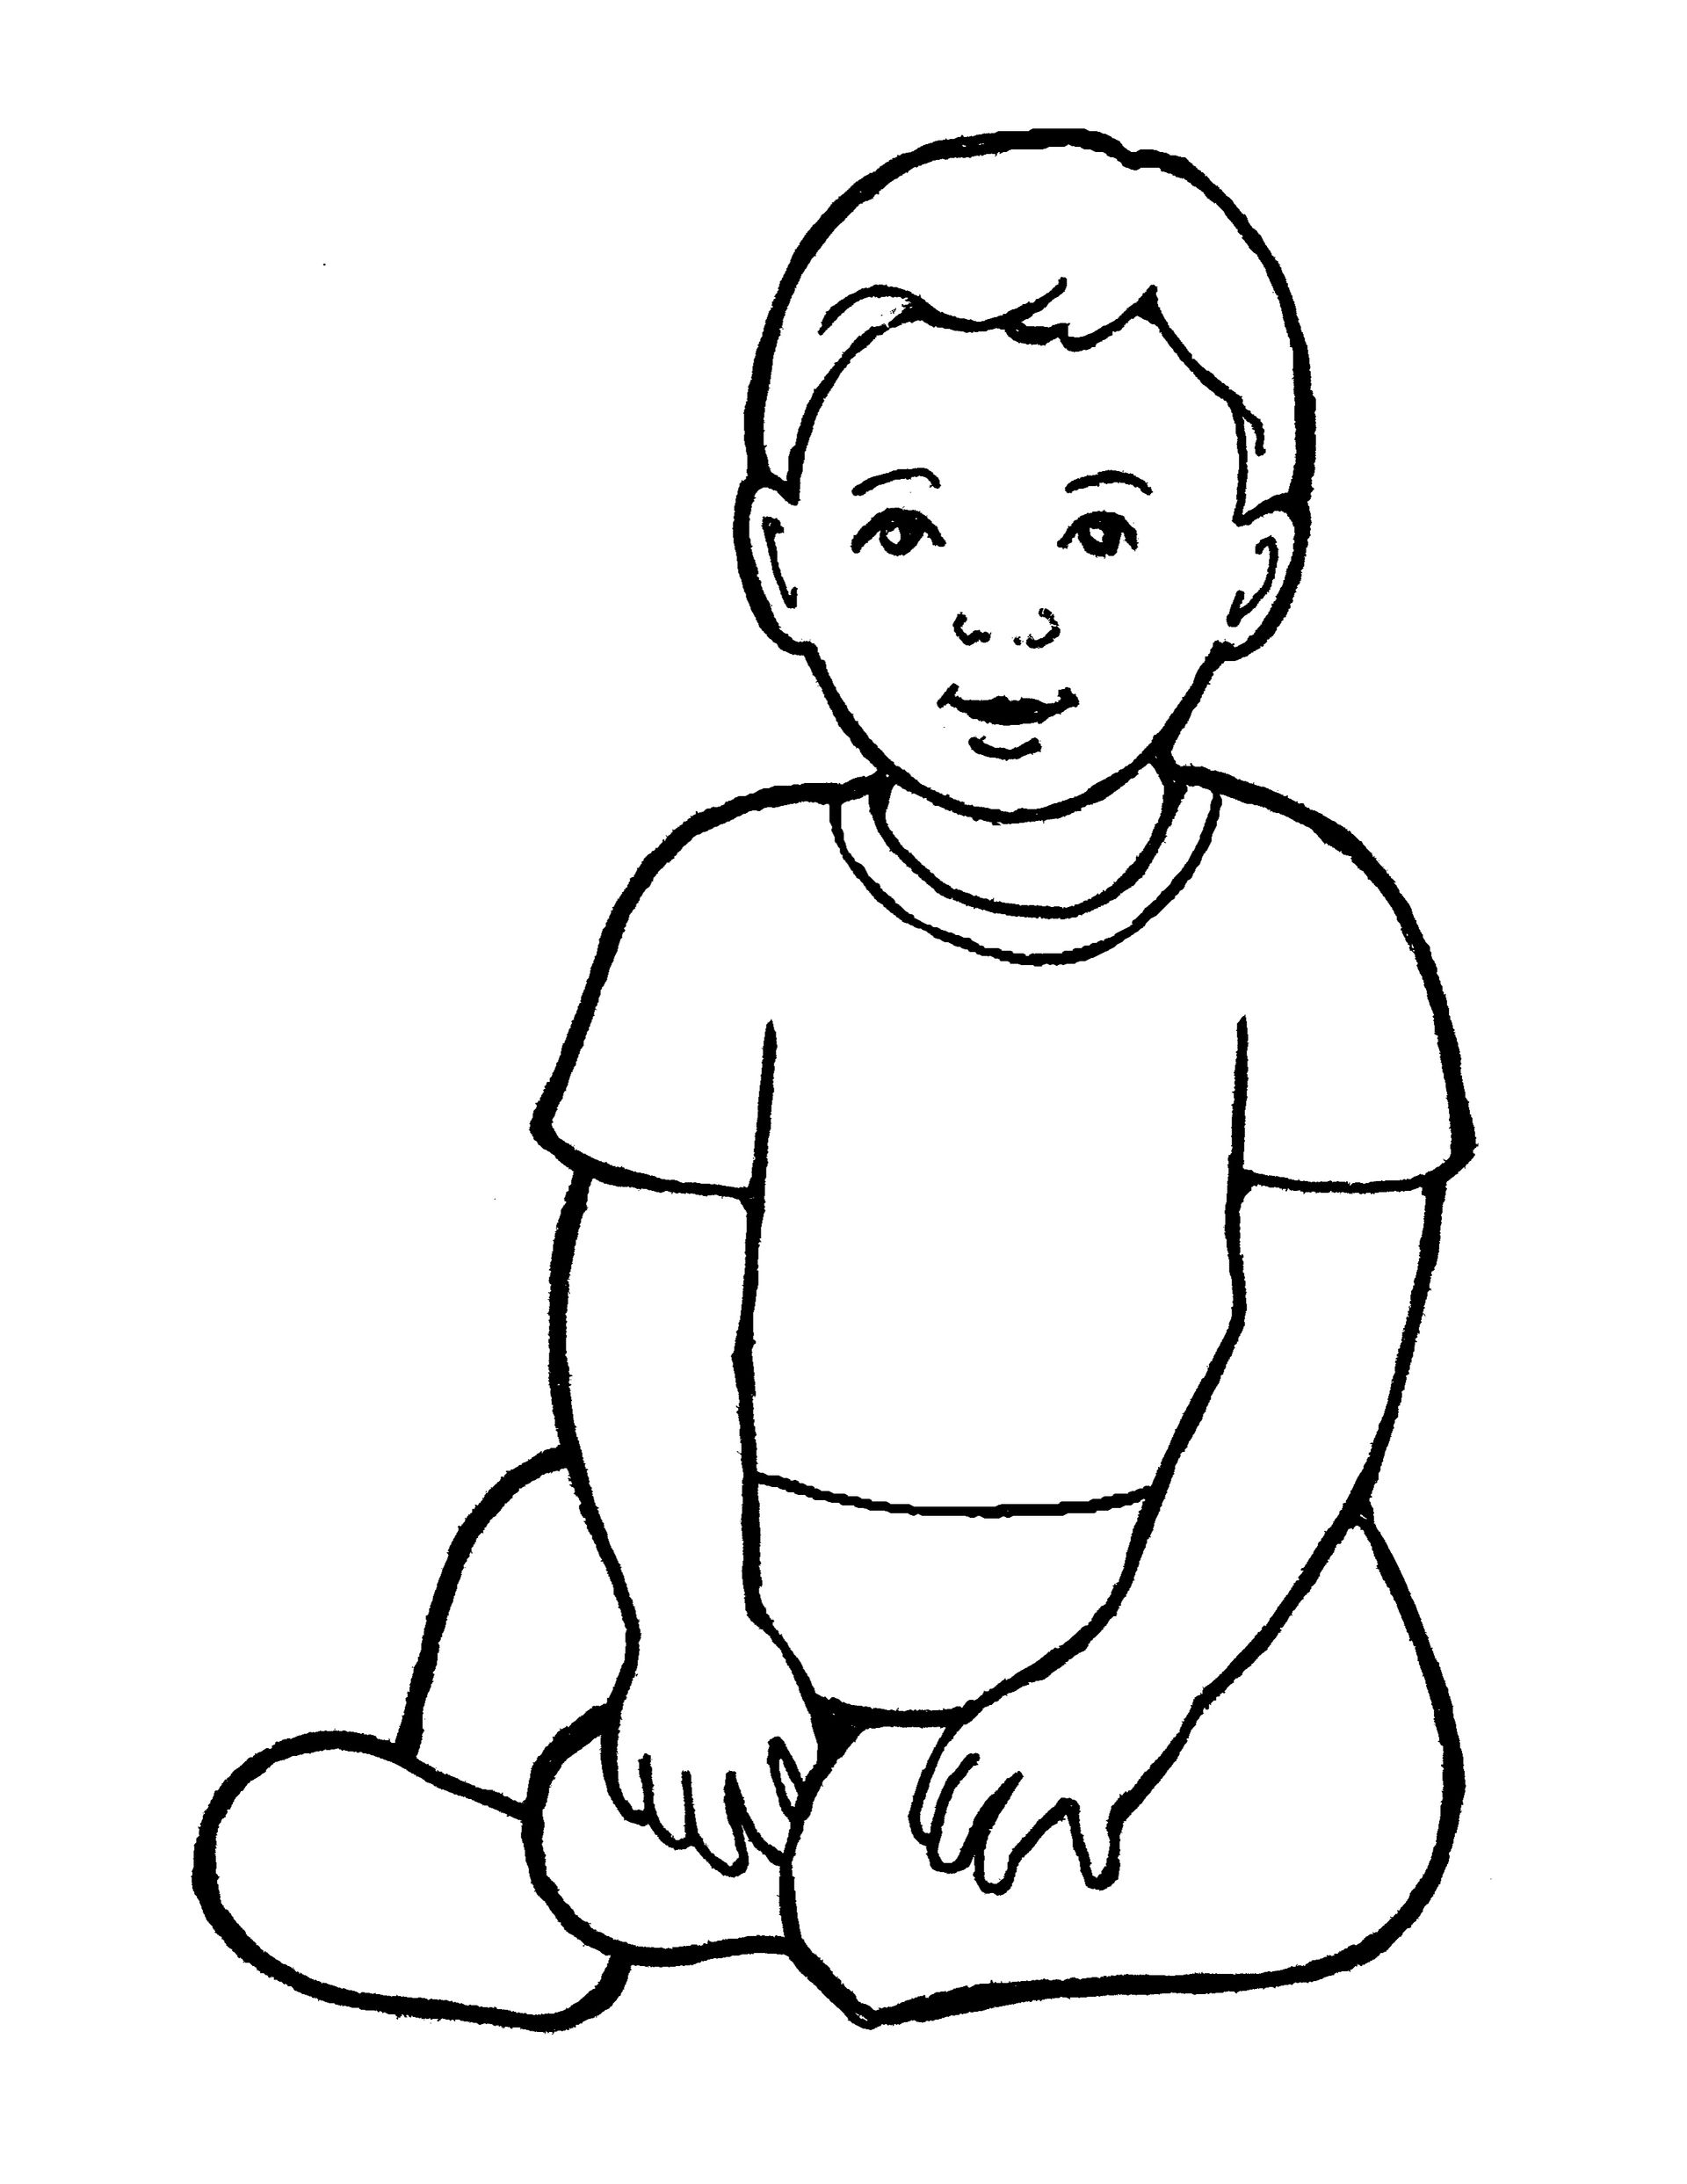 An illustration of a baby boy from the nursery manual Behold Your Little Ones (2008), page 59.